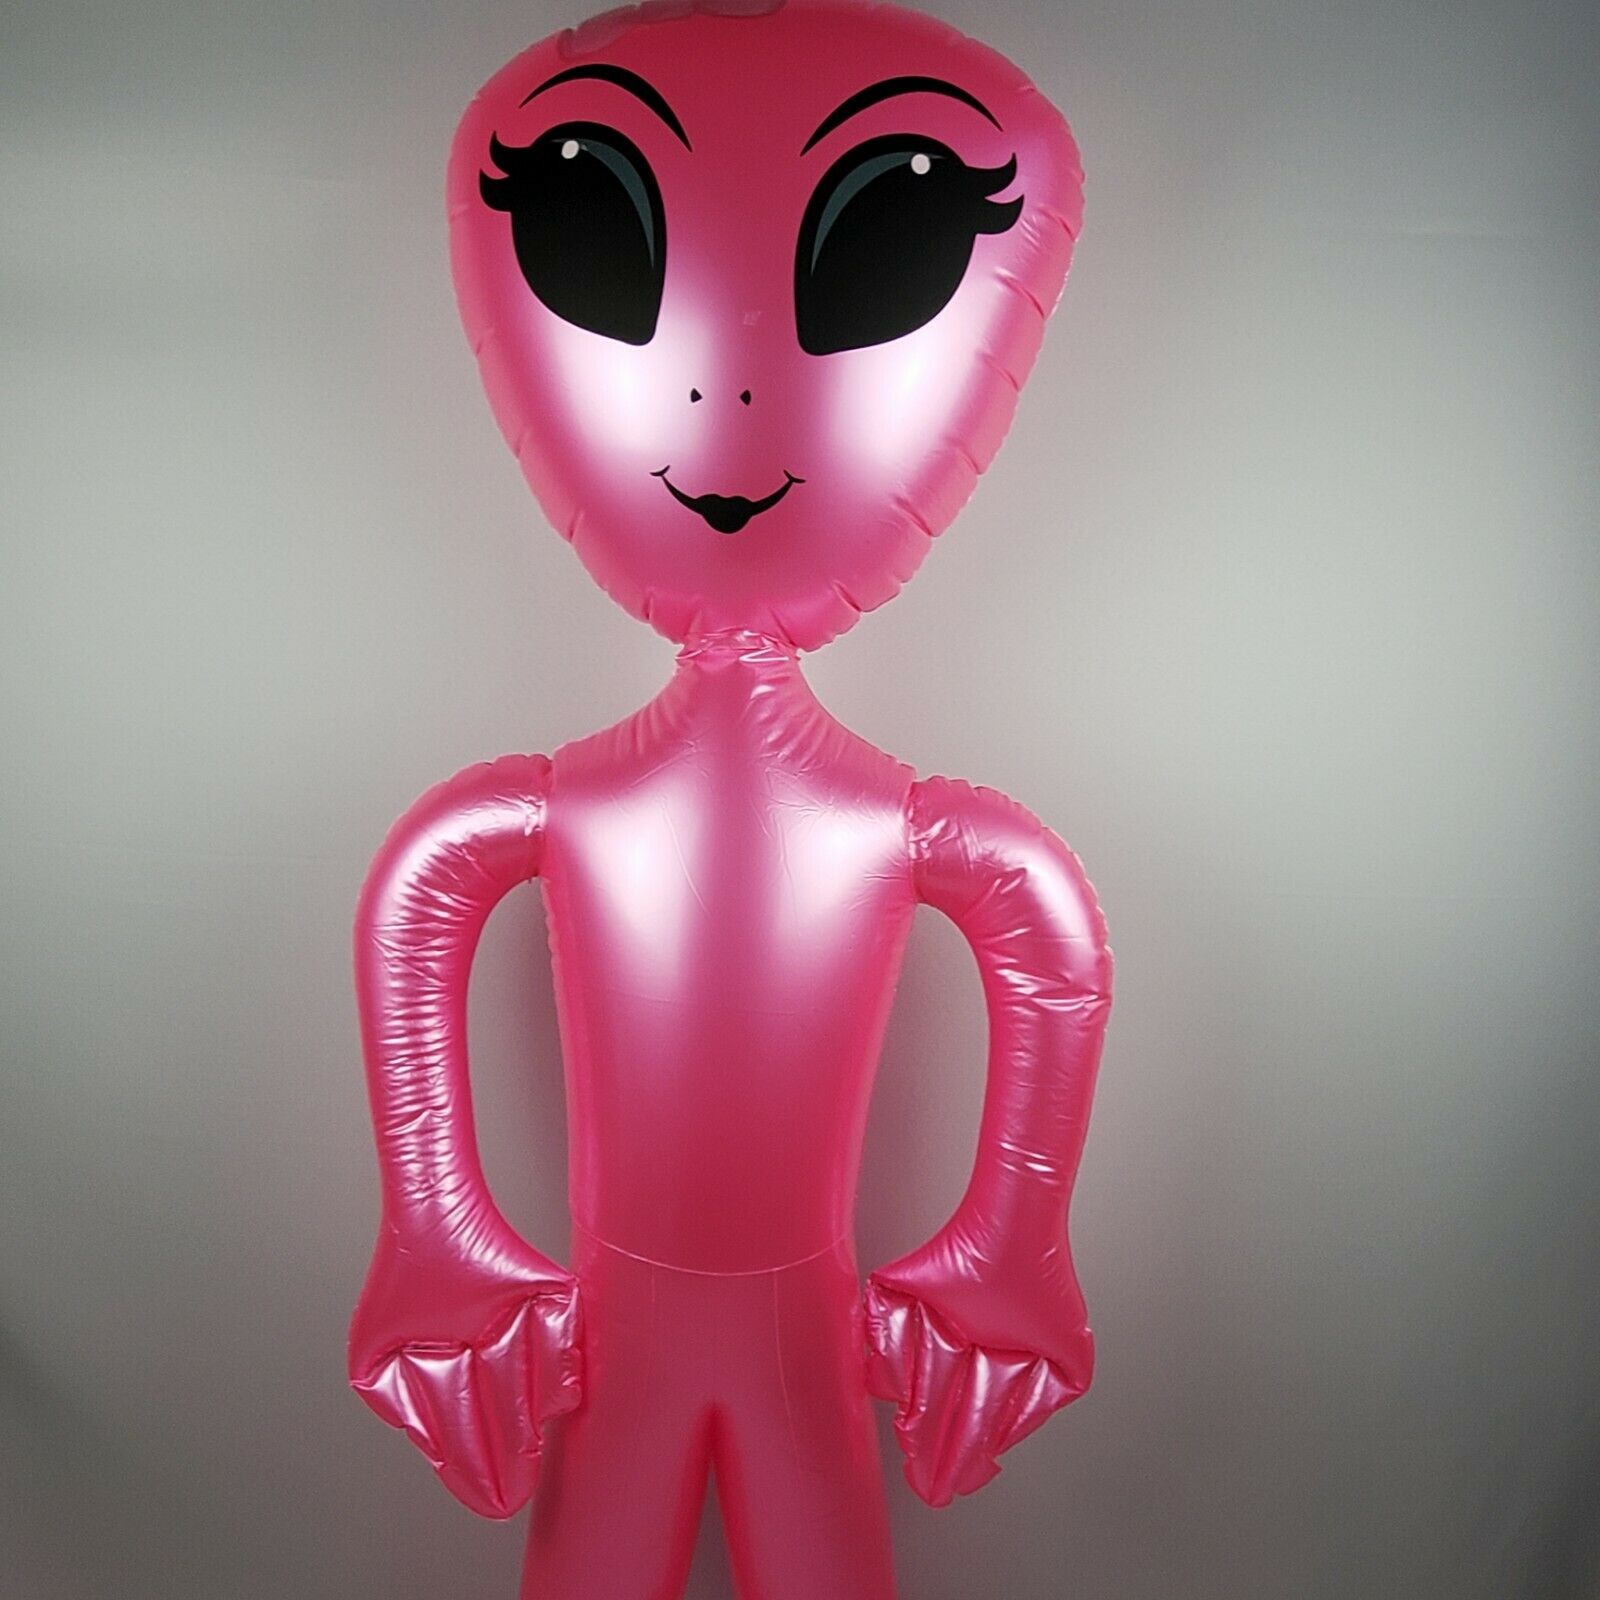 Inflatable Pink Girl Alien 60" Tall Blow Up Girly Halloween Prop Decoration